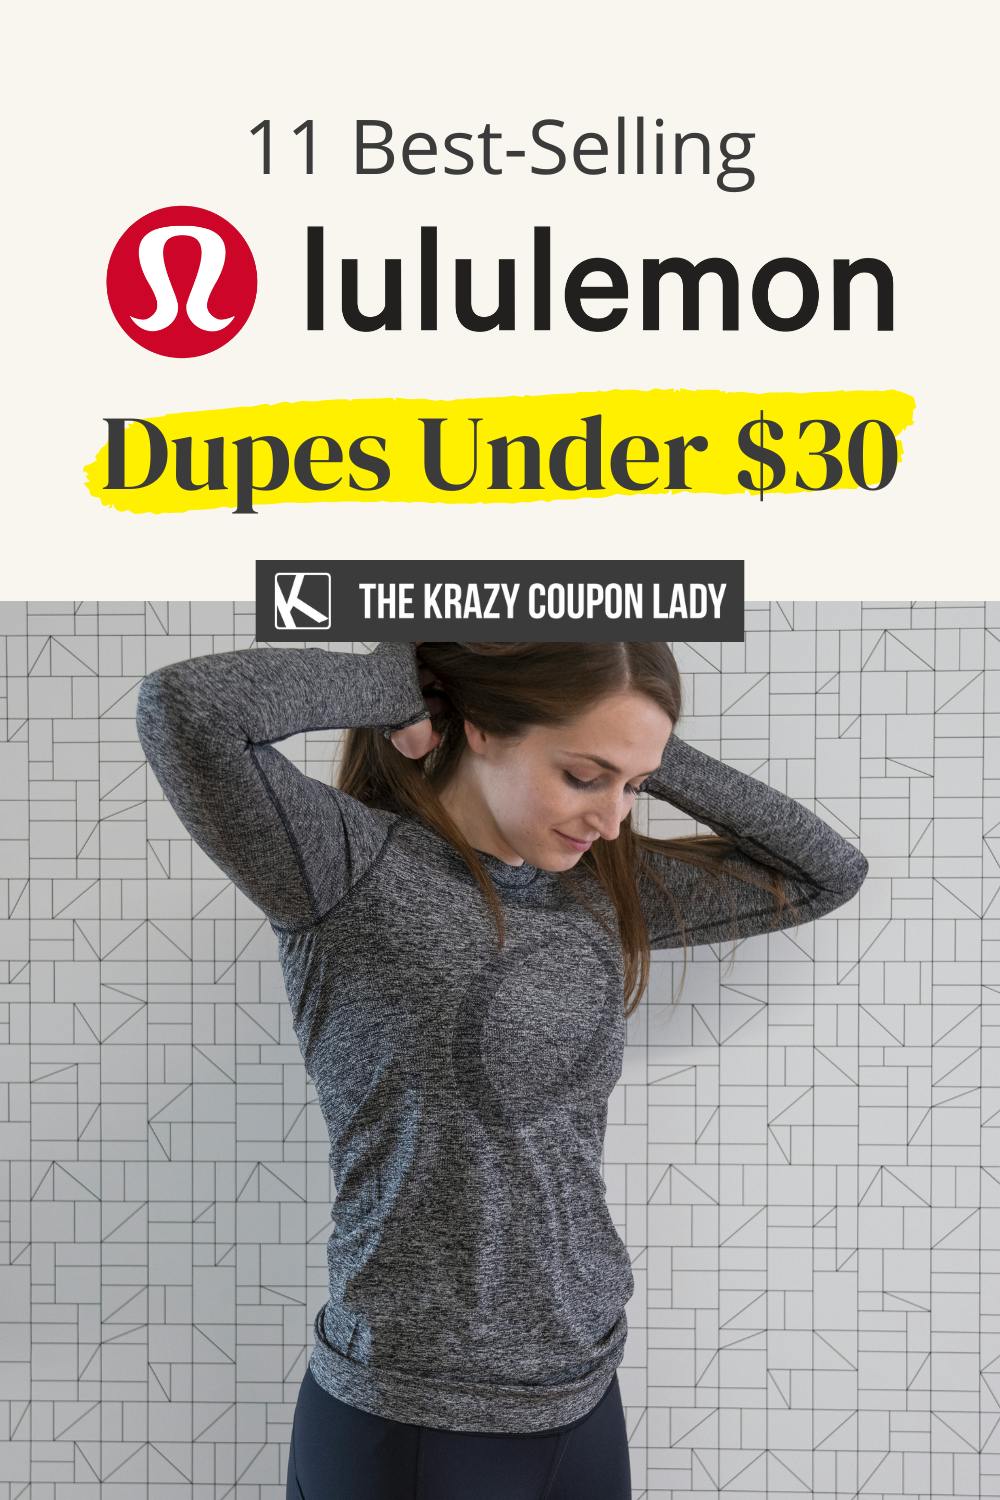 11 Best-Selling Lululemon Dupes for Under $30 - The Krazy Coupon Lady